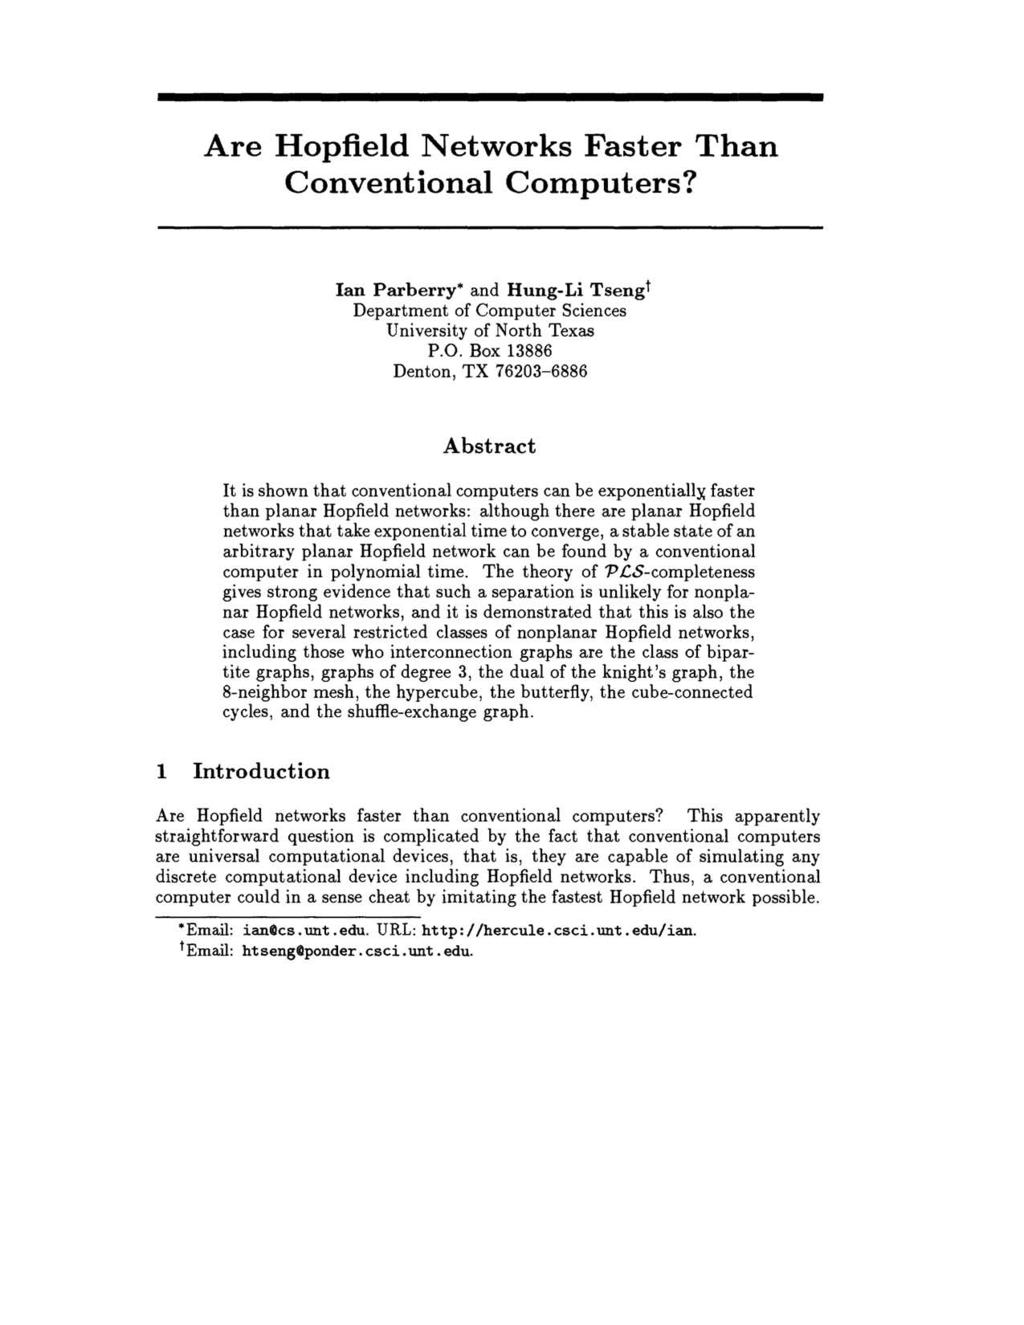 Are Hopfield Networks Faster Than Conventional Computers? Ian Parberry* and Hung-Li Tsengt Department of Computer Sciences University of North Texas P.O.